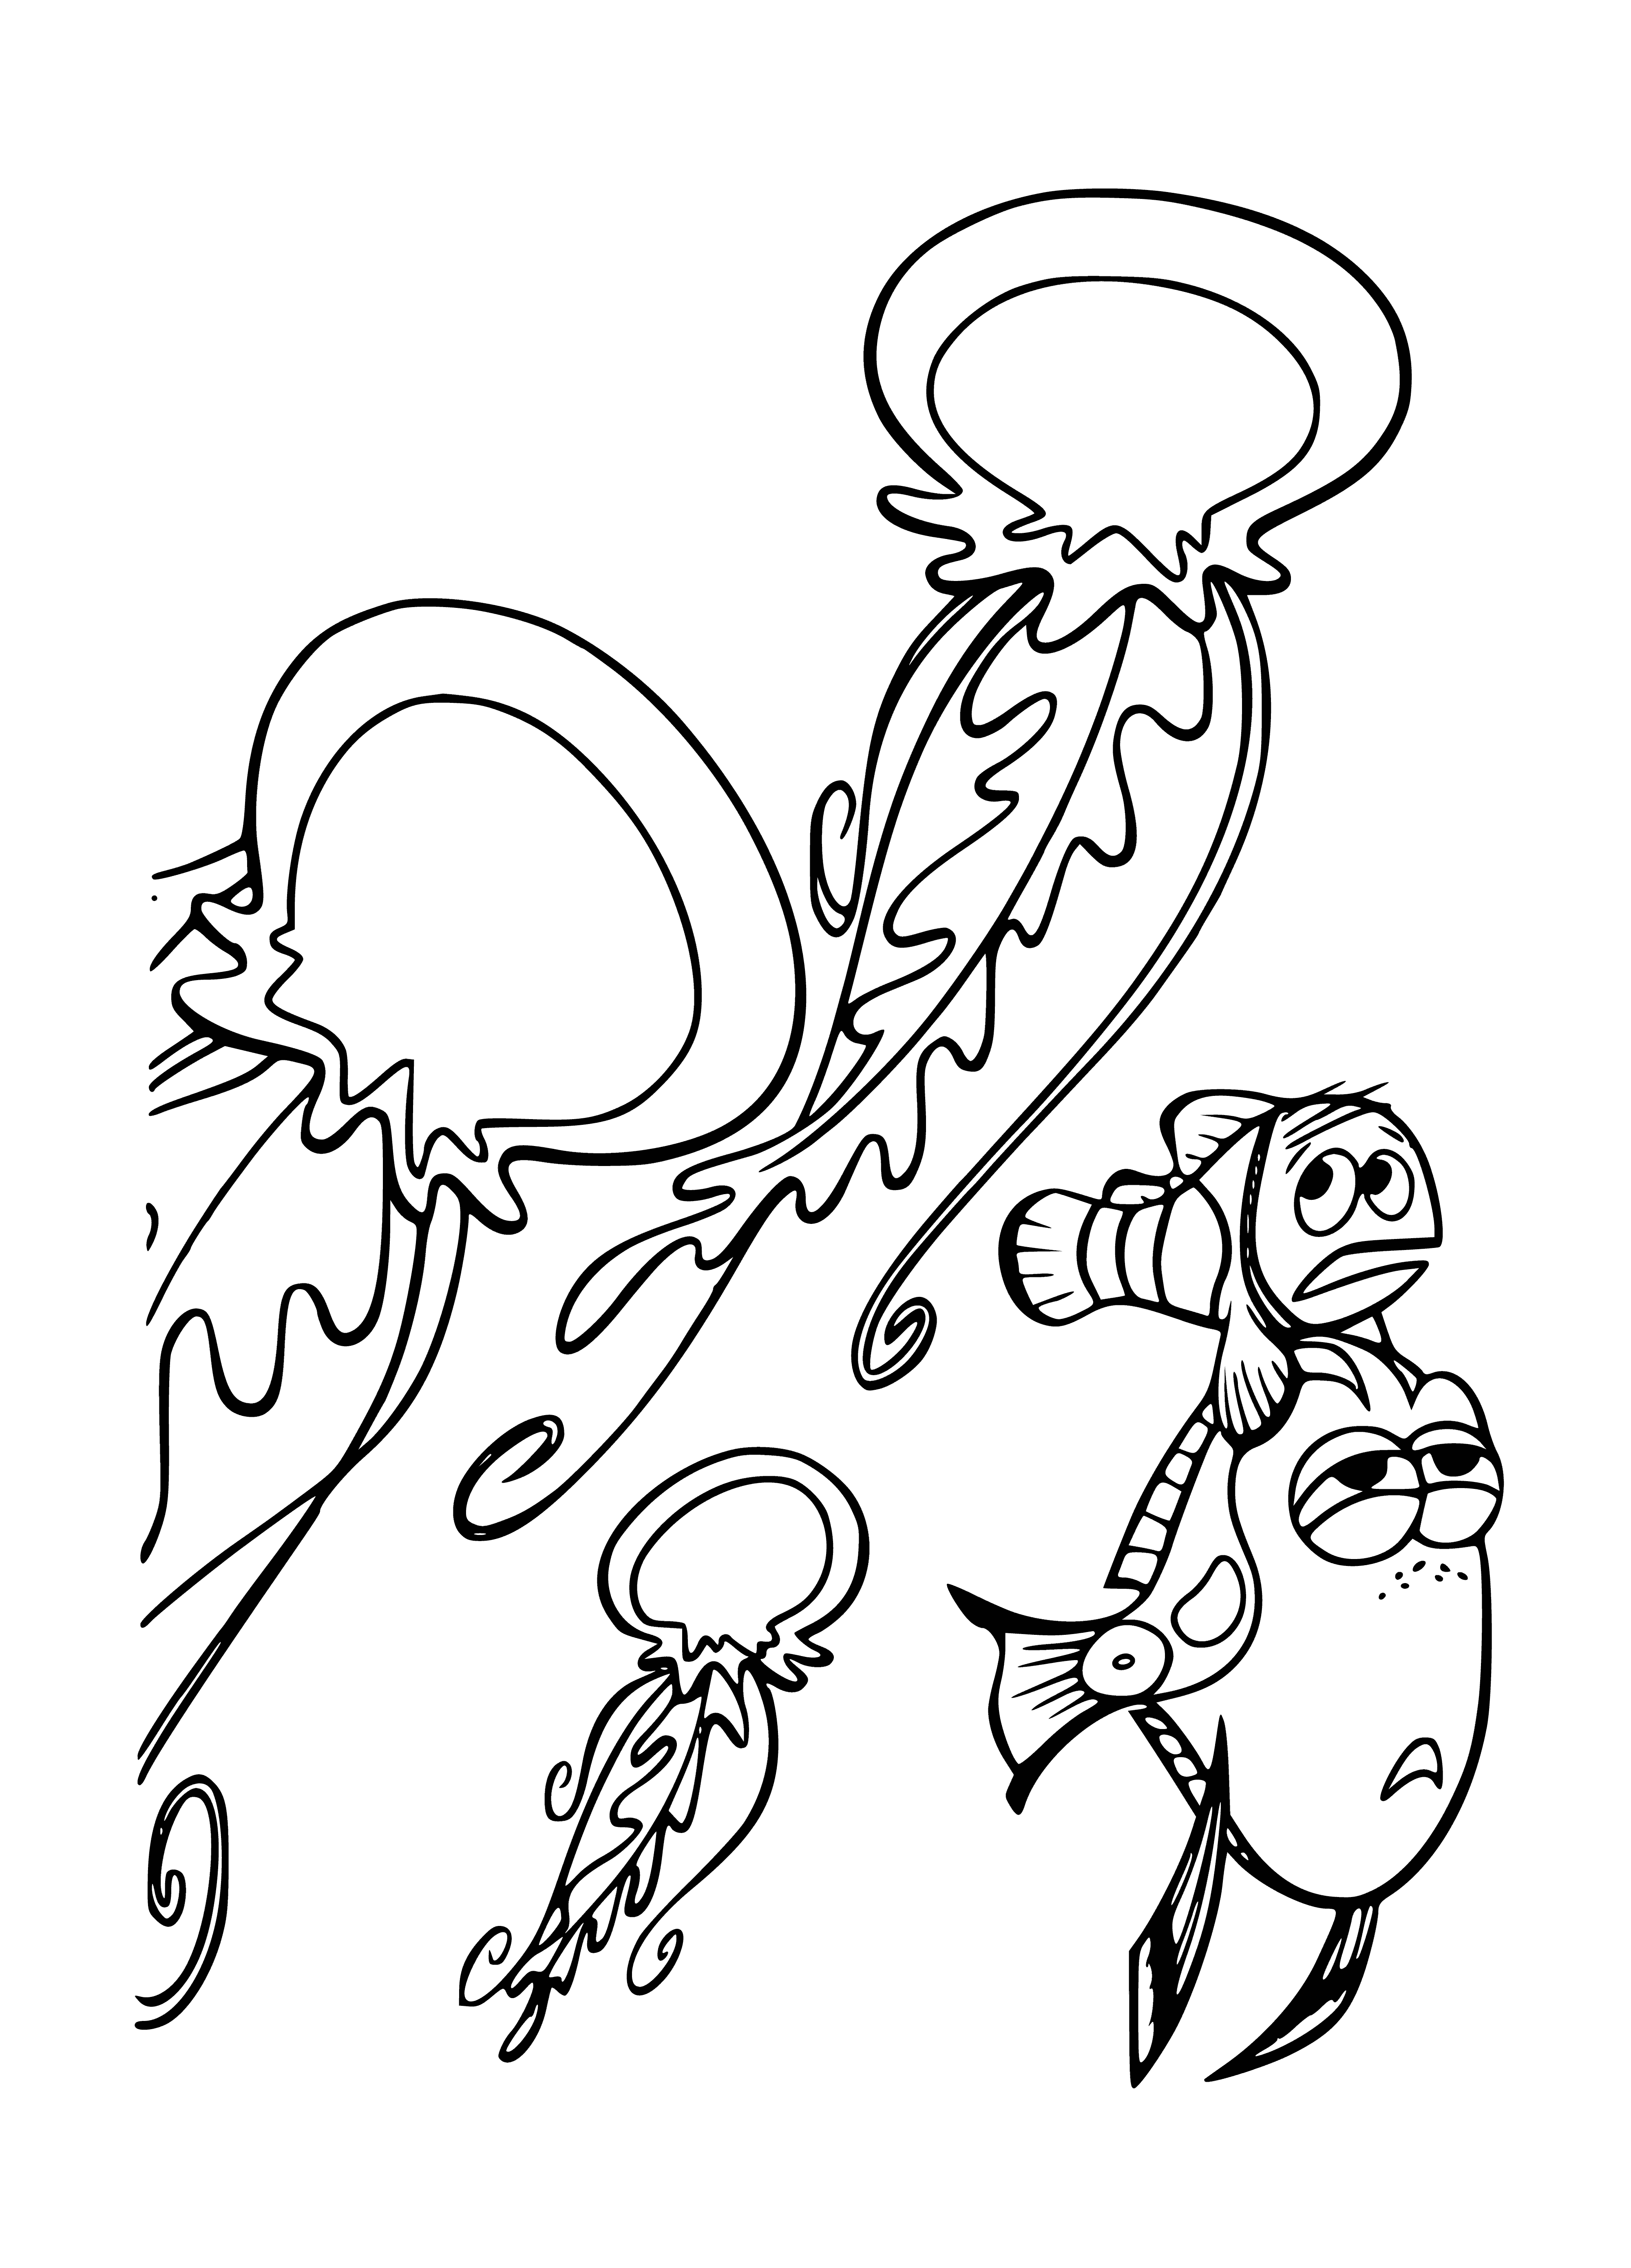 coloring page: Clear jellyfish w/long tentacles, white underside & dark top. Covered in white dots, floating in water - the Finding Nemo - Insidious Jellyfish!